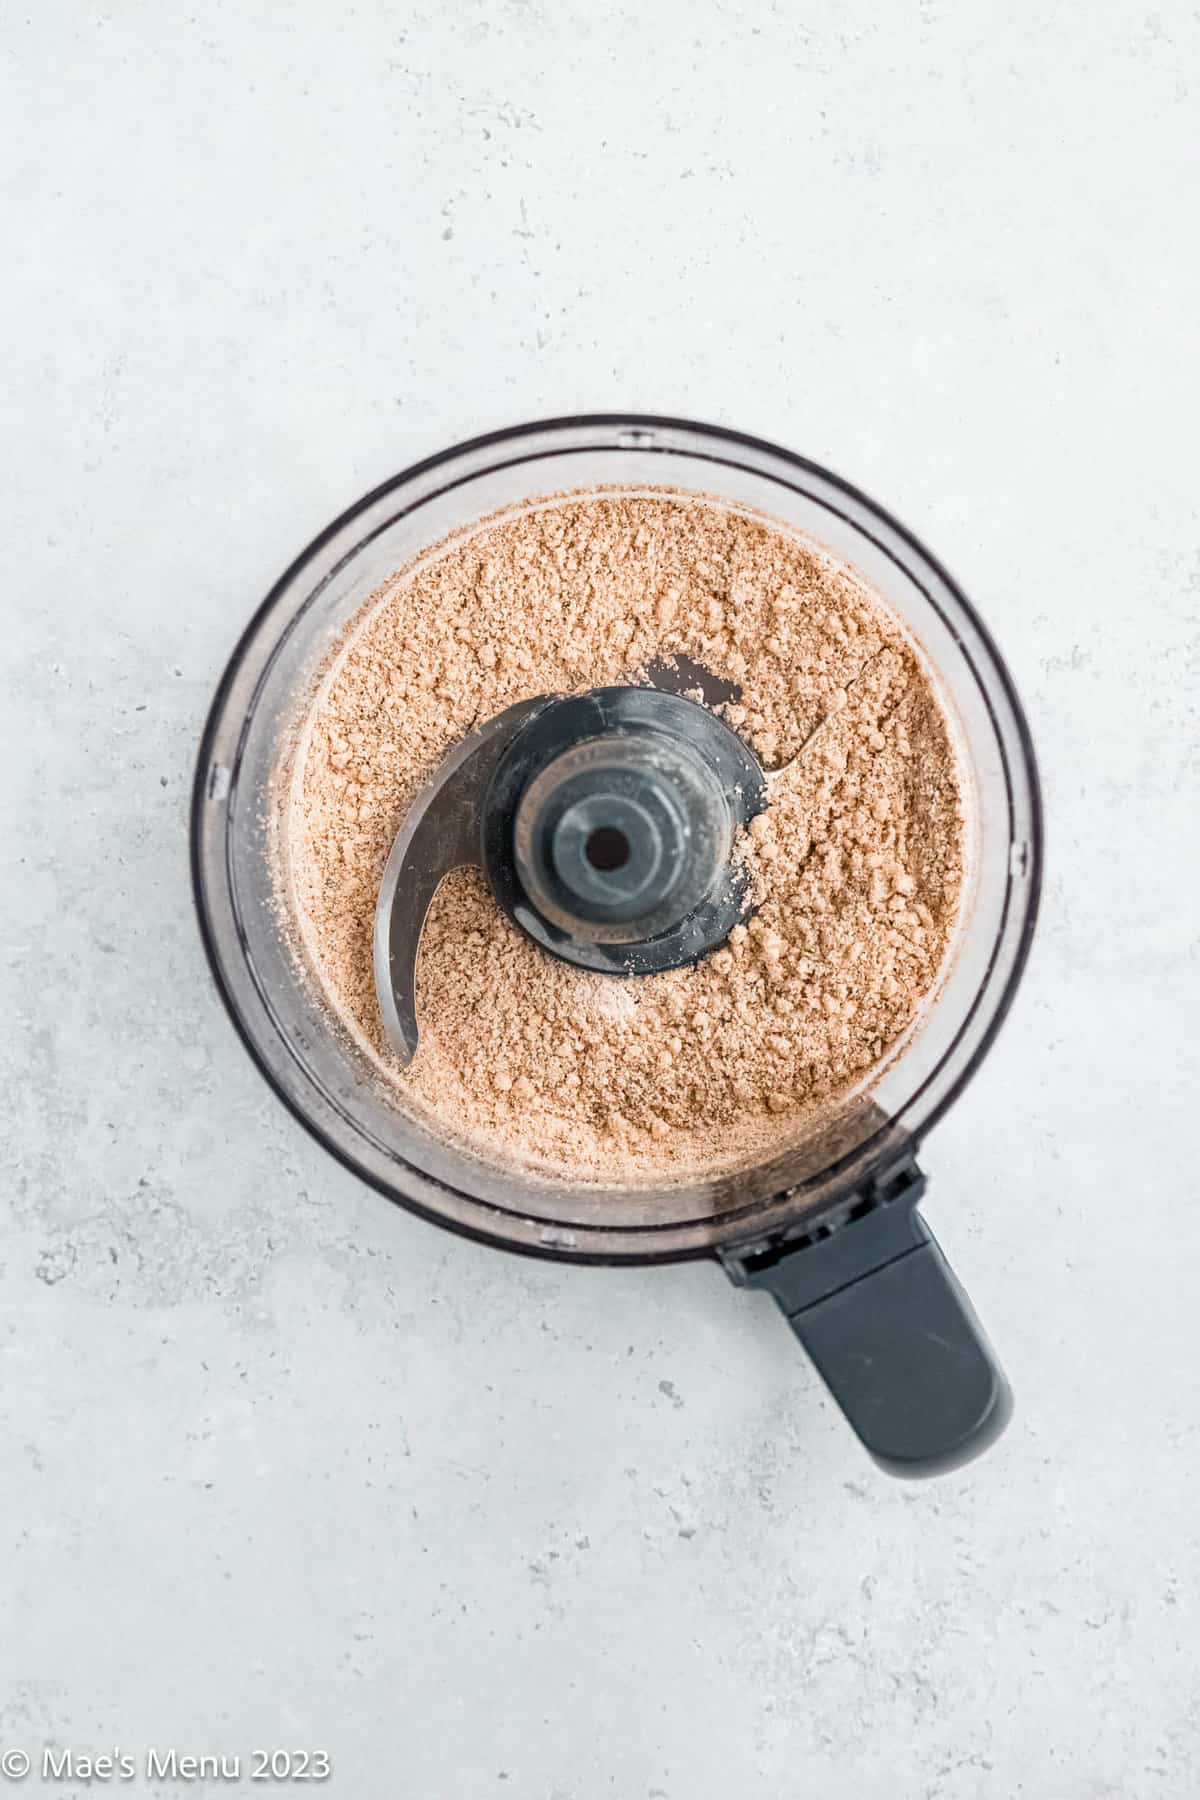 Blended walnuts and flour in a food processor.